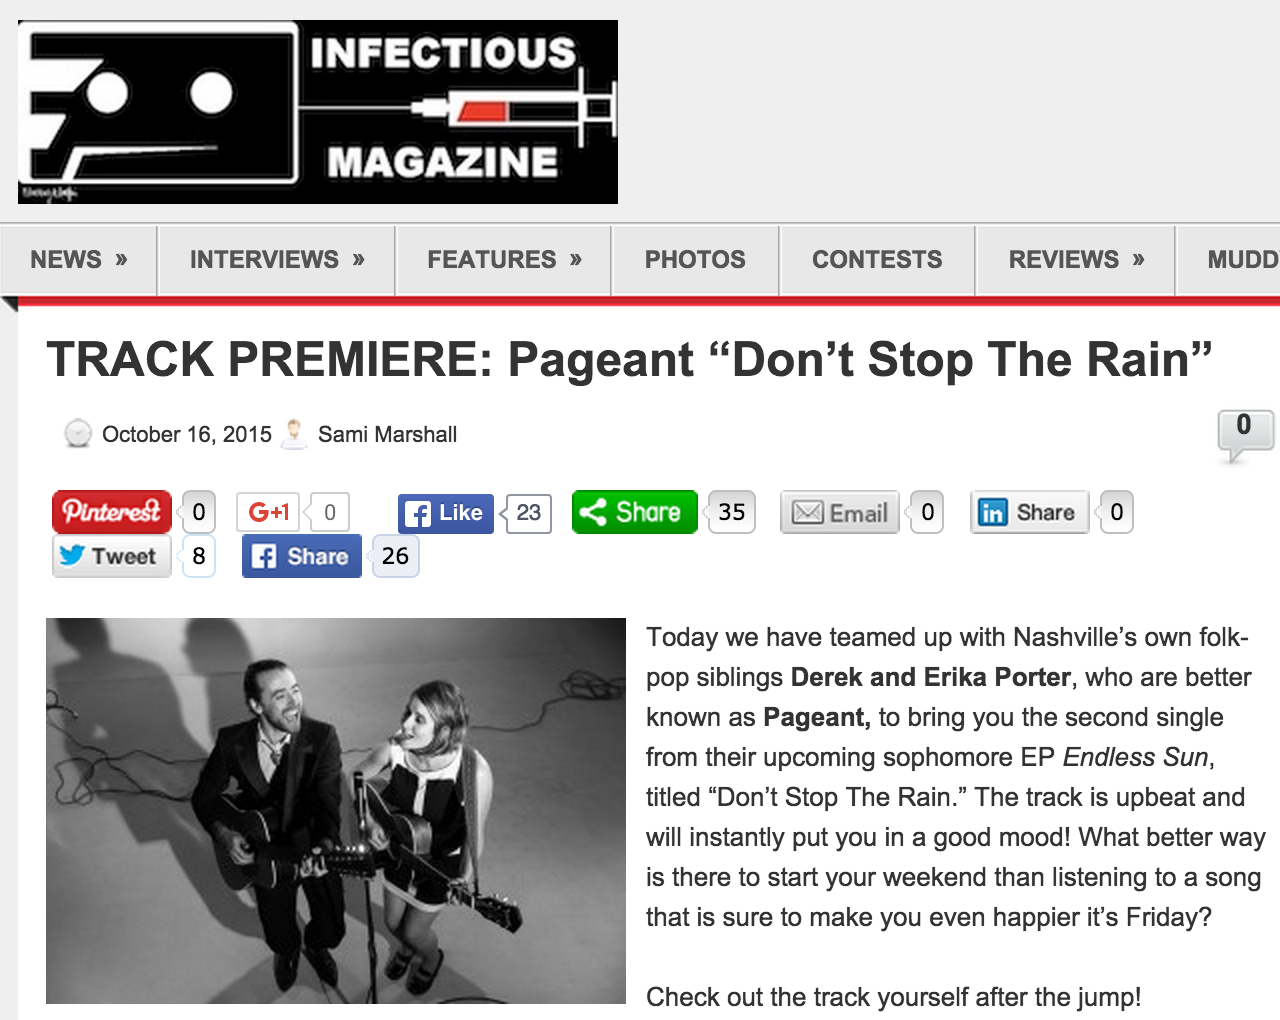 TRACK PREMIERE: Pageant "Don’t Stop The Rain" Oct 16, 2015